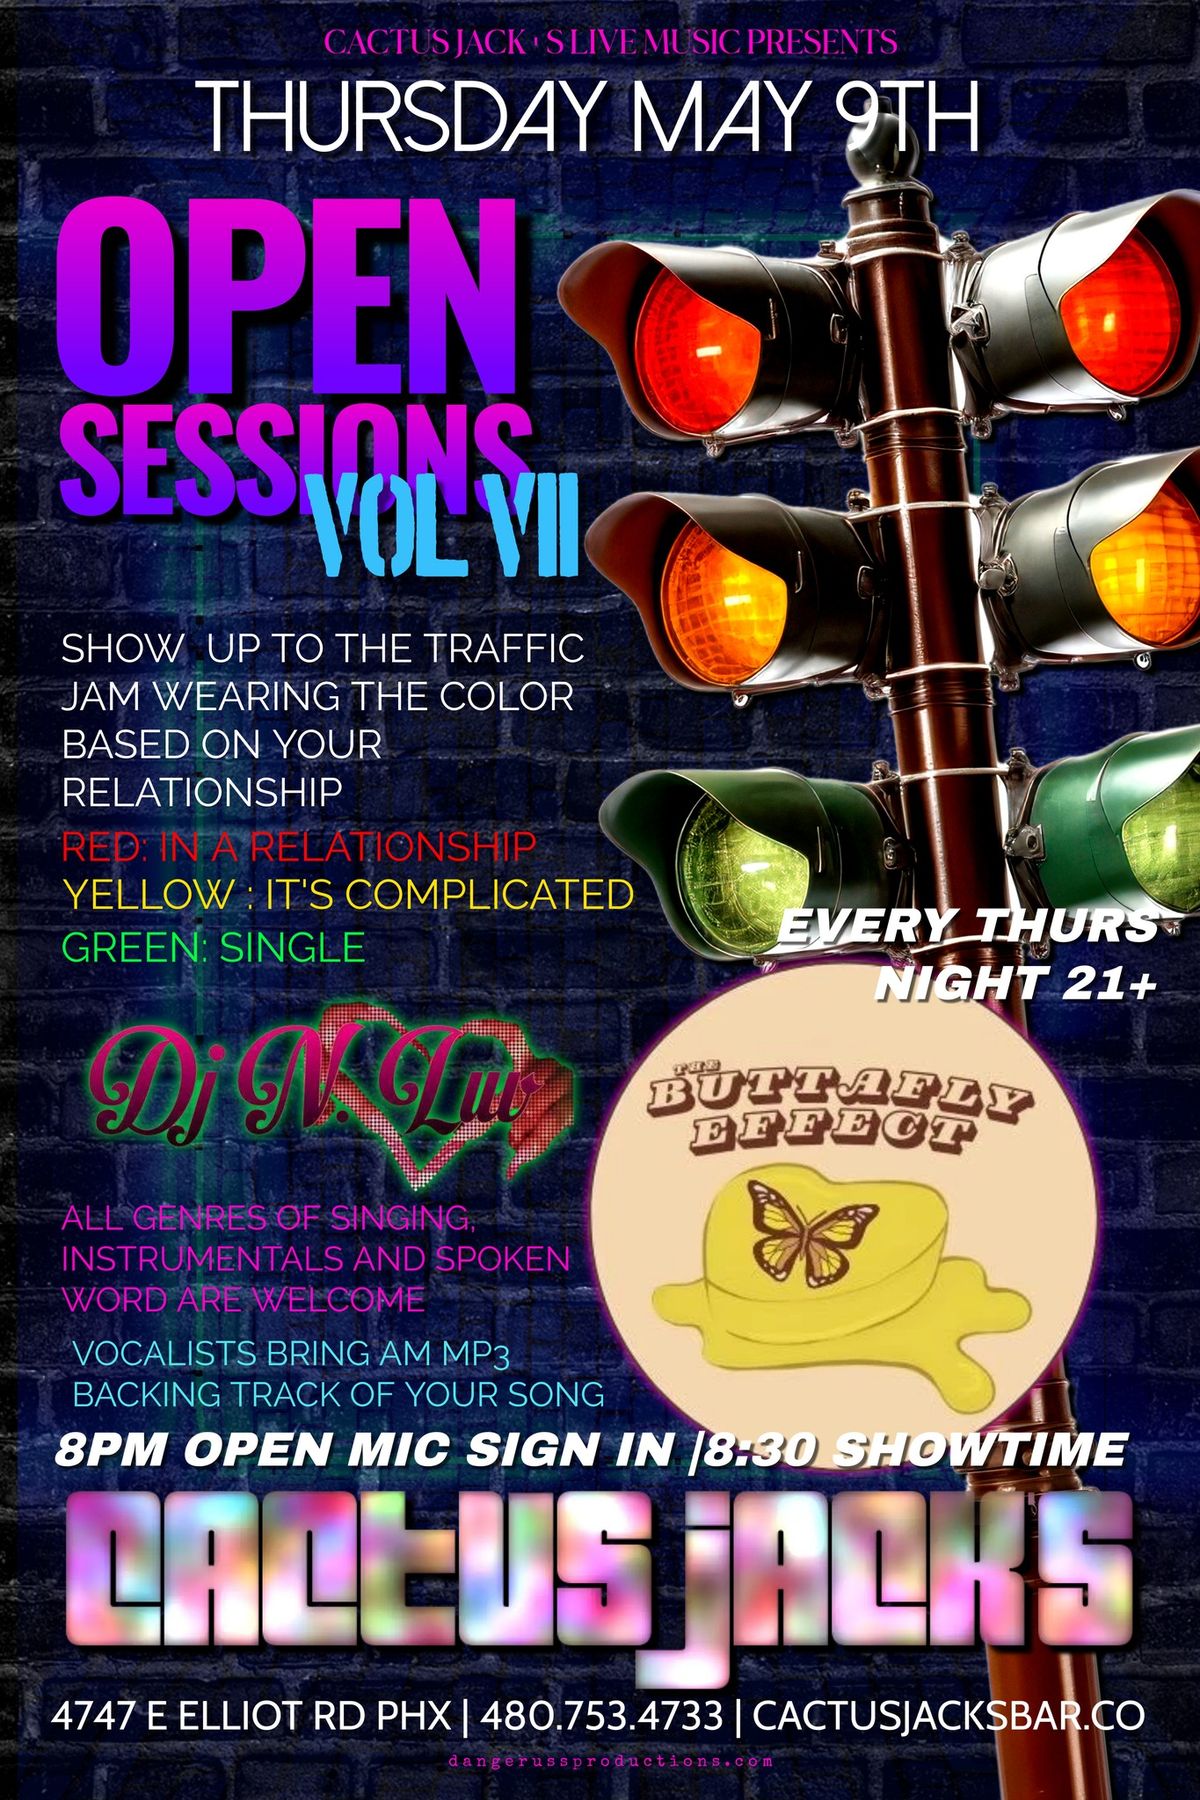 Open Sessions? The Buttafly Effect with Dj N Luv at Cactus Jack's!